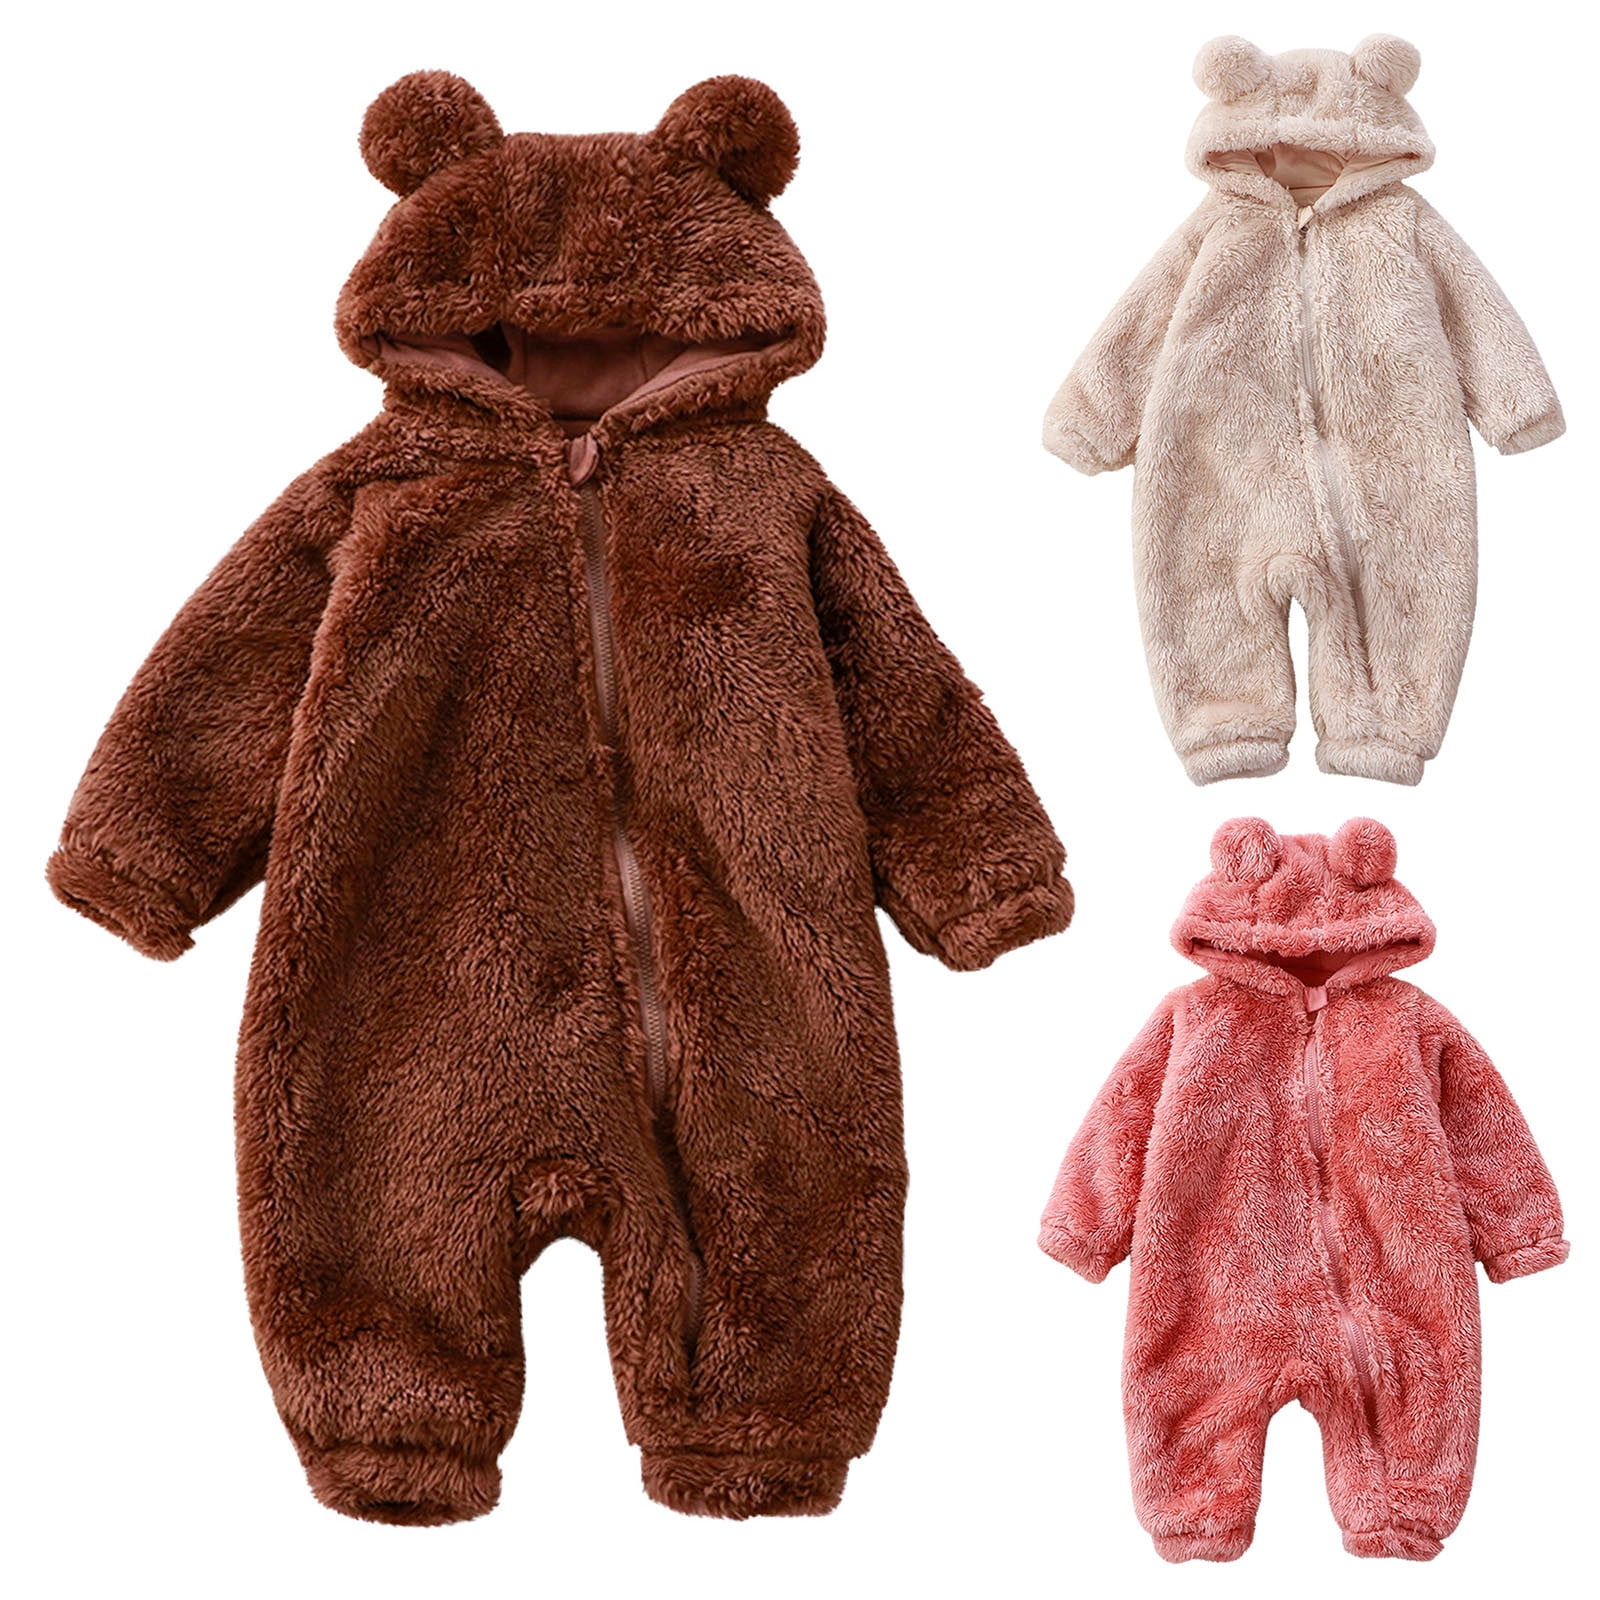 skpabo Baby Boy Girl Zipper Fleece Hooded Bear Jumpsuit with Cute Ears  Fuzzy Long Sleeve Jumpsuit Toddler Infant Fall Winter Outfit Brown 9-12  Months 